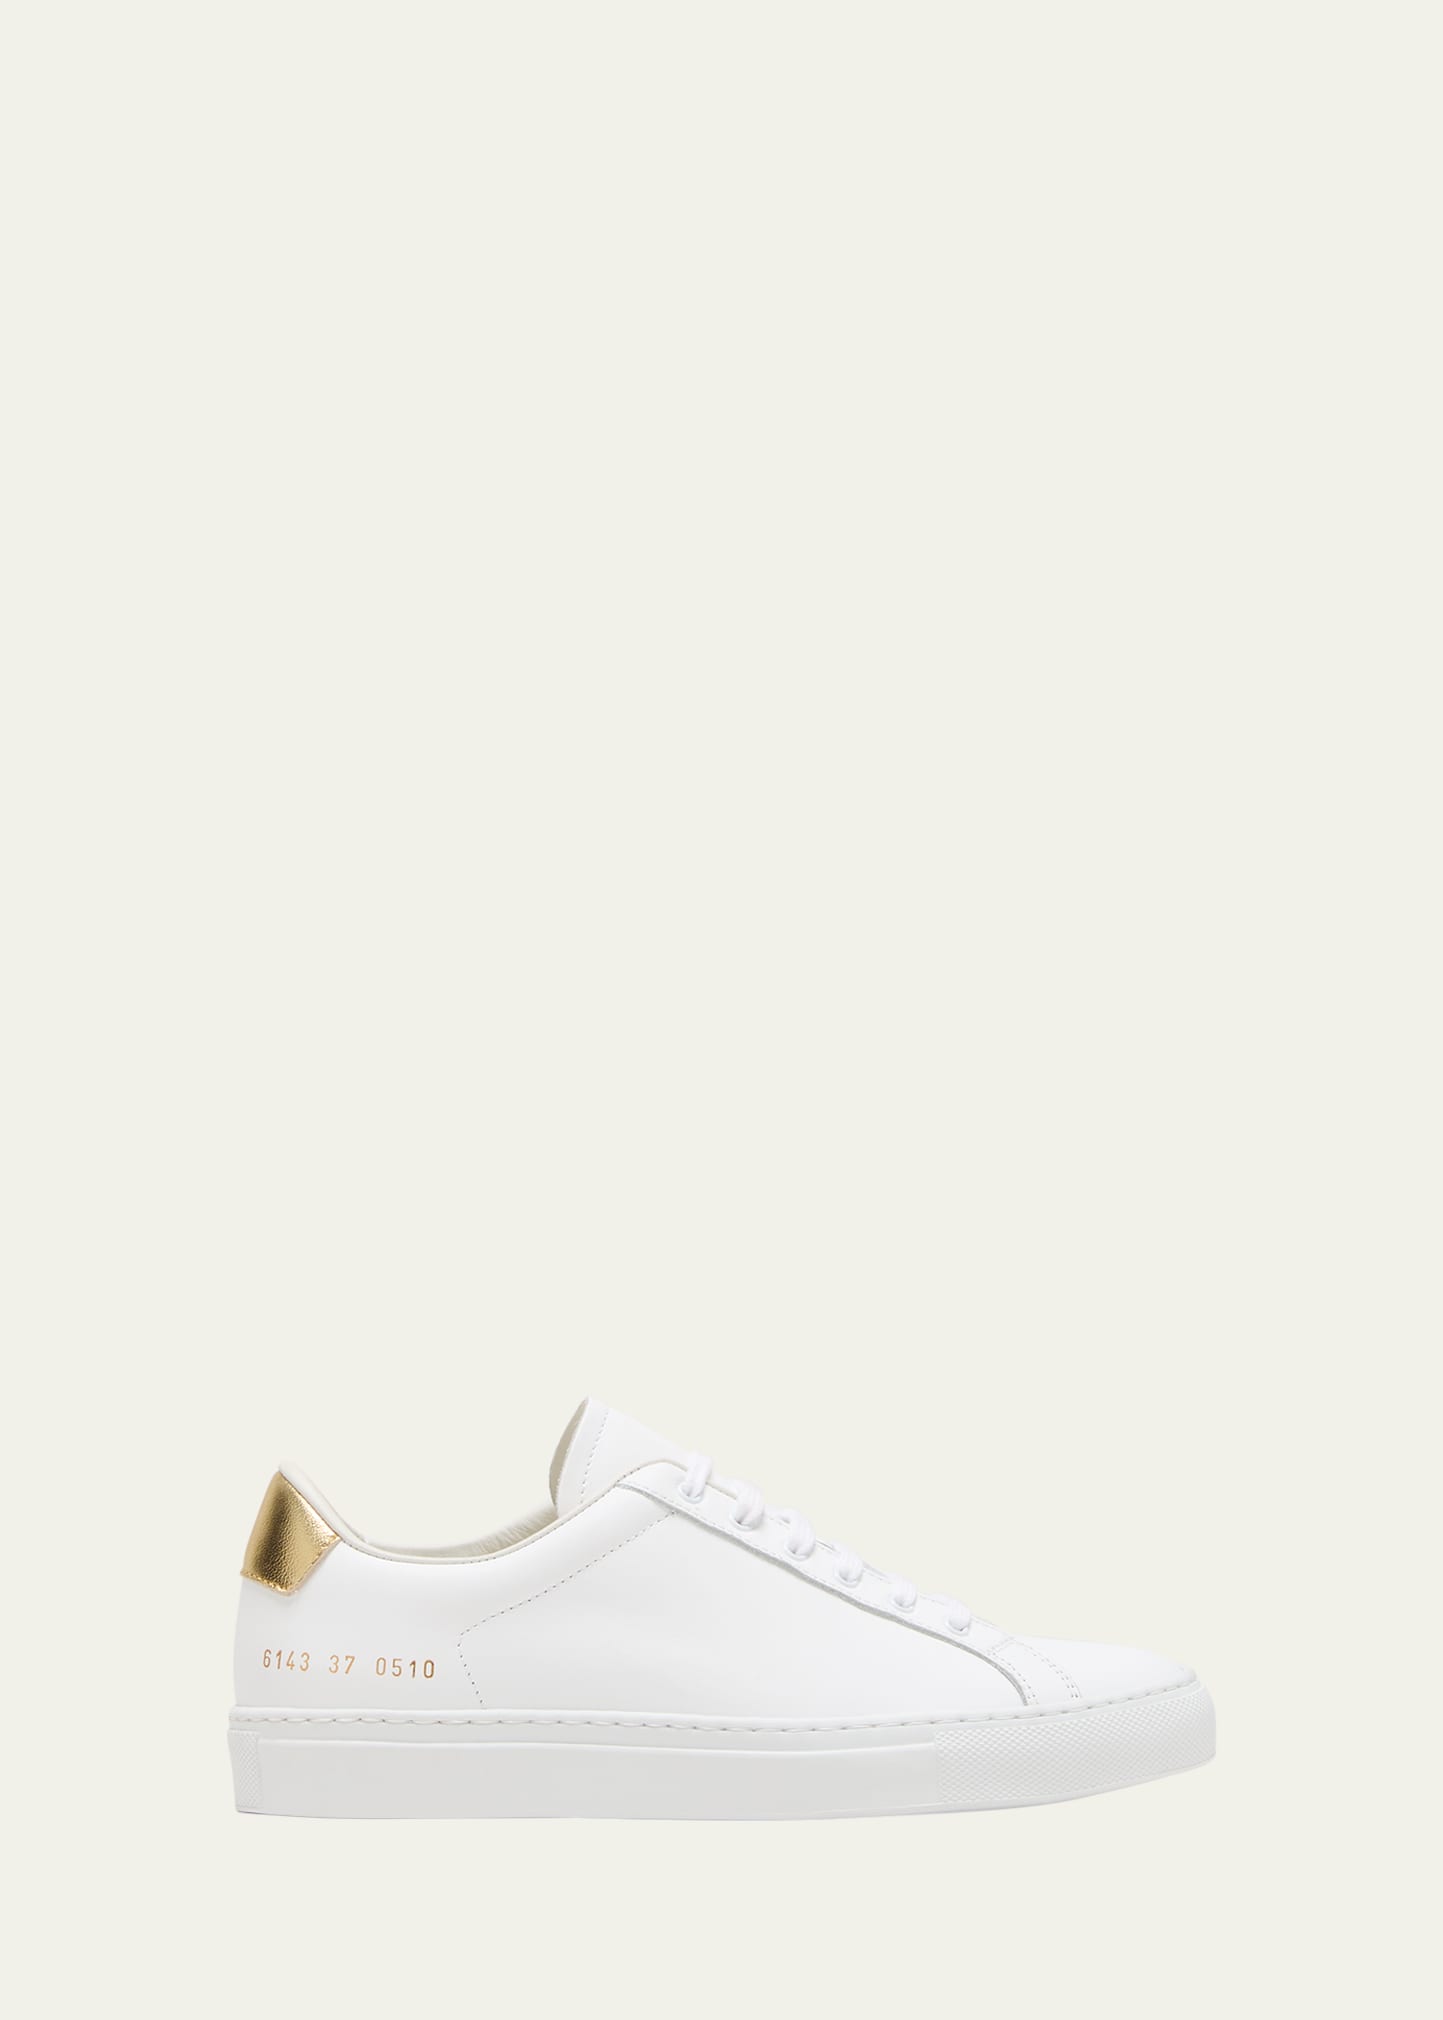 COMMON PROJECTS RETRO LEATHER LOW-TOP SNEAKERS